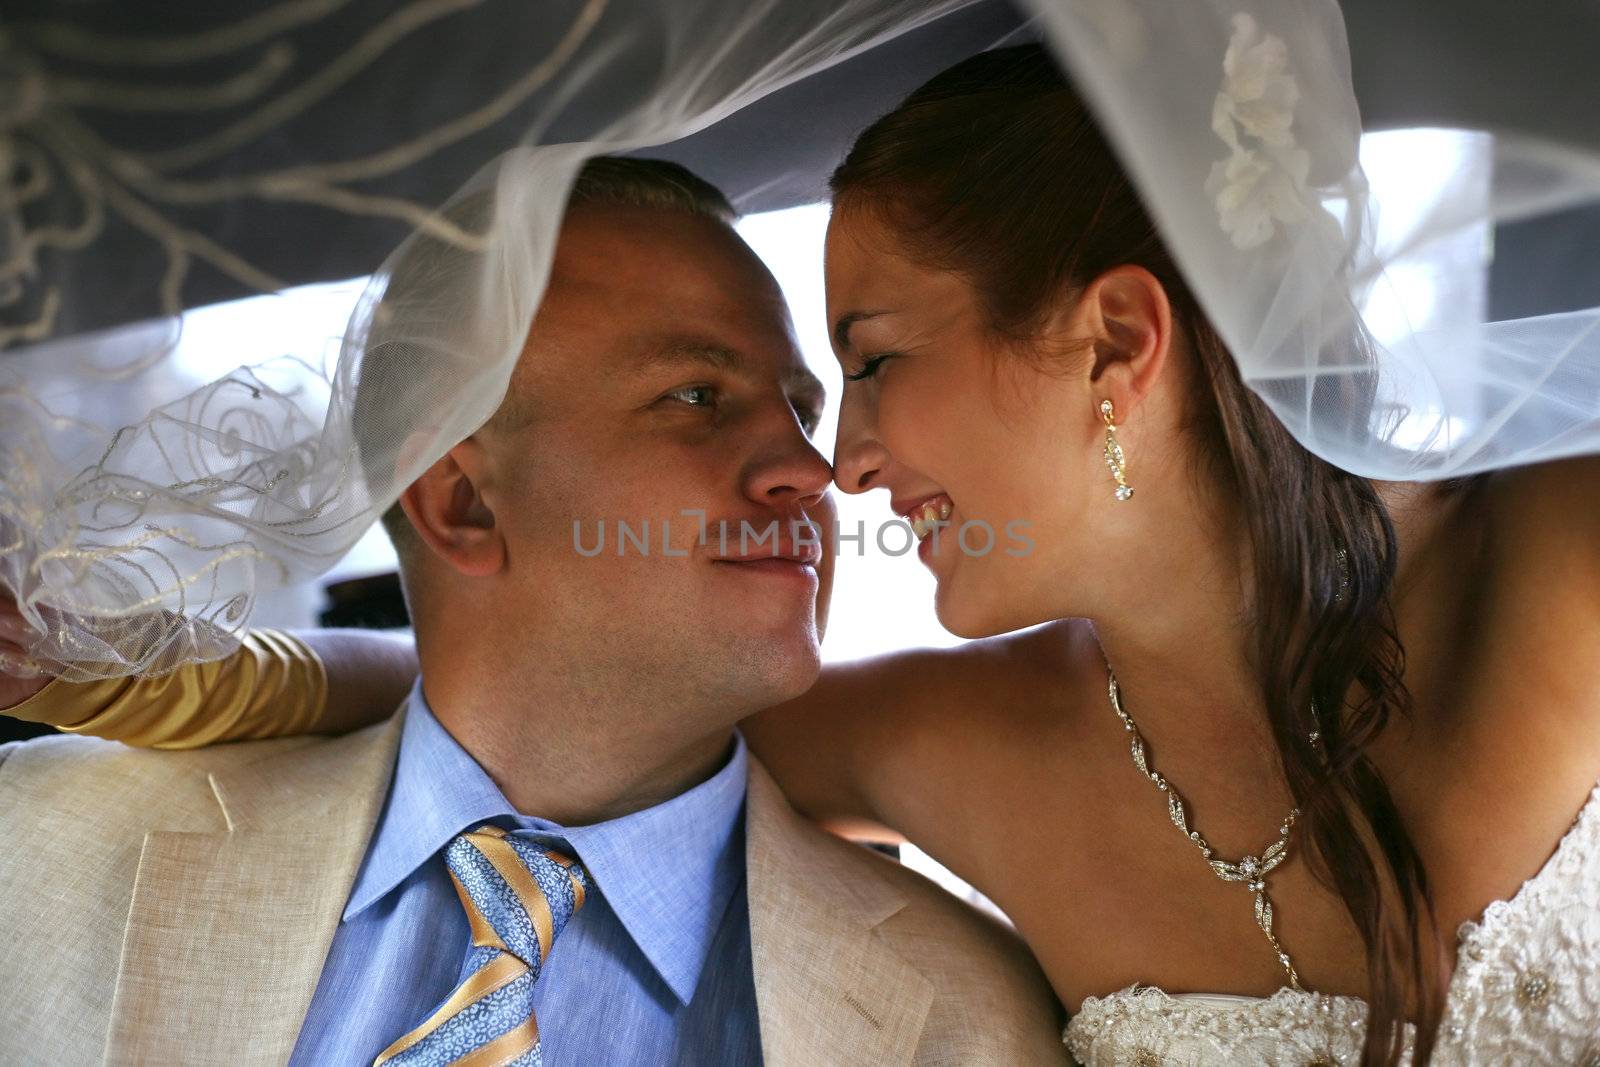 The groom and the bride in car